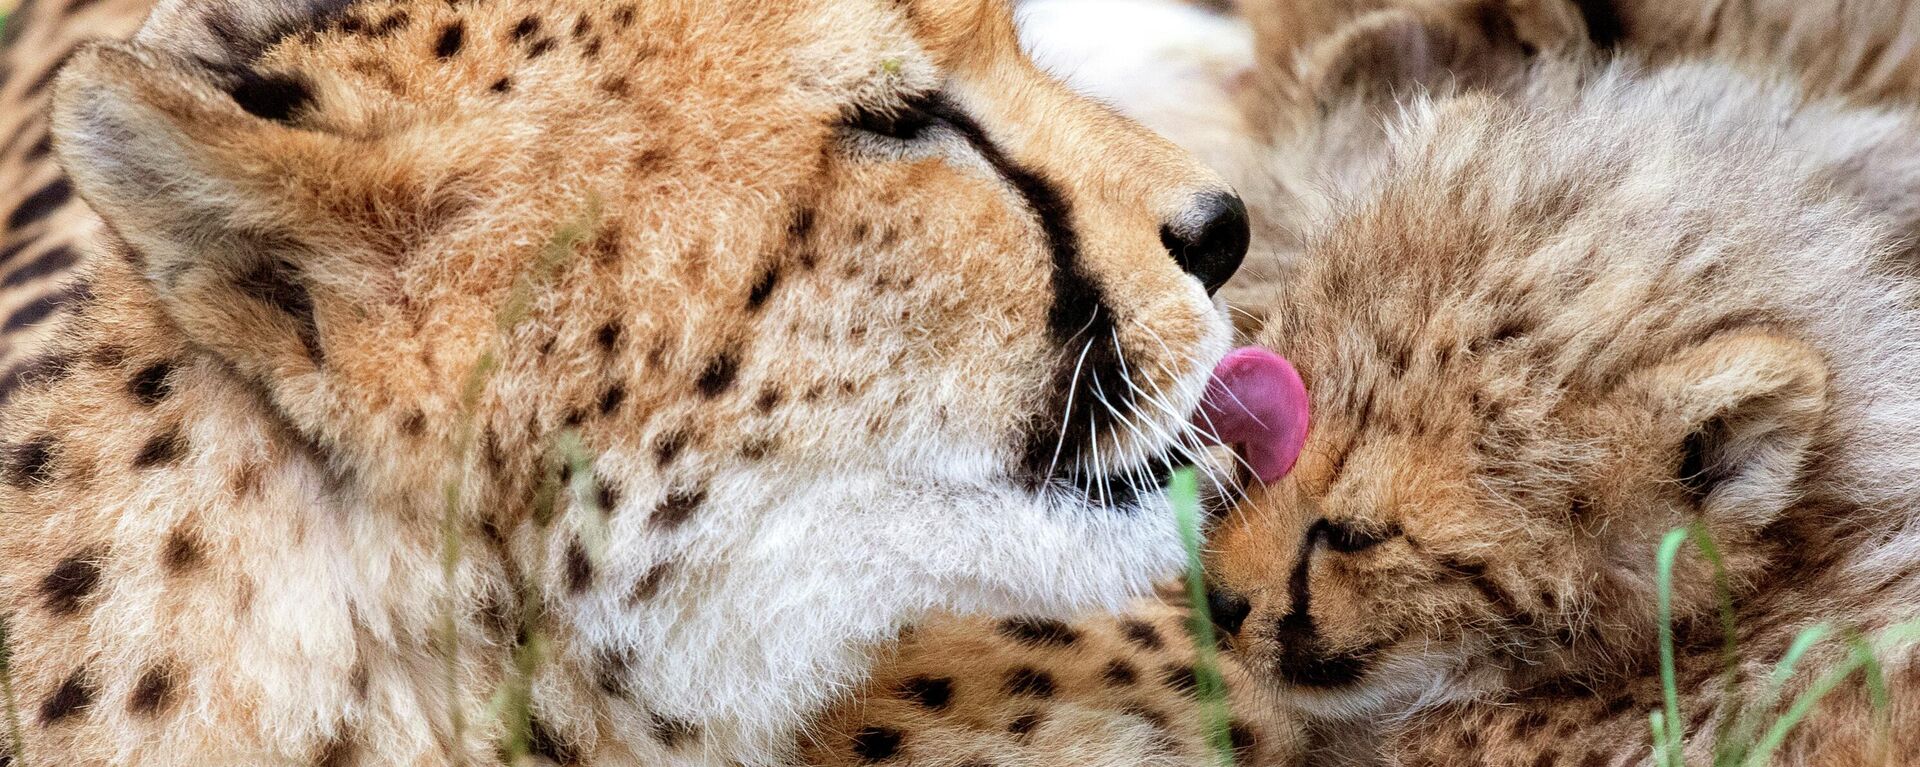 The cheetah mother Freela relaxes with one of her cubs in the Erfurt zoo in Erfurt, Germany, Wednesday, June 27, 2018. The four cheetah cubs, one male and three female, were born on May 9, 2018. (AP Photo/Jens Meyer) - Sputnik International, 1920, 09.09.2022